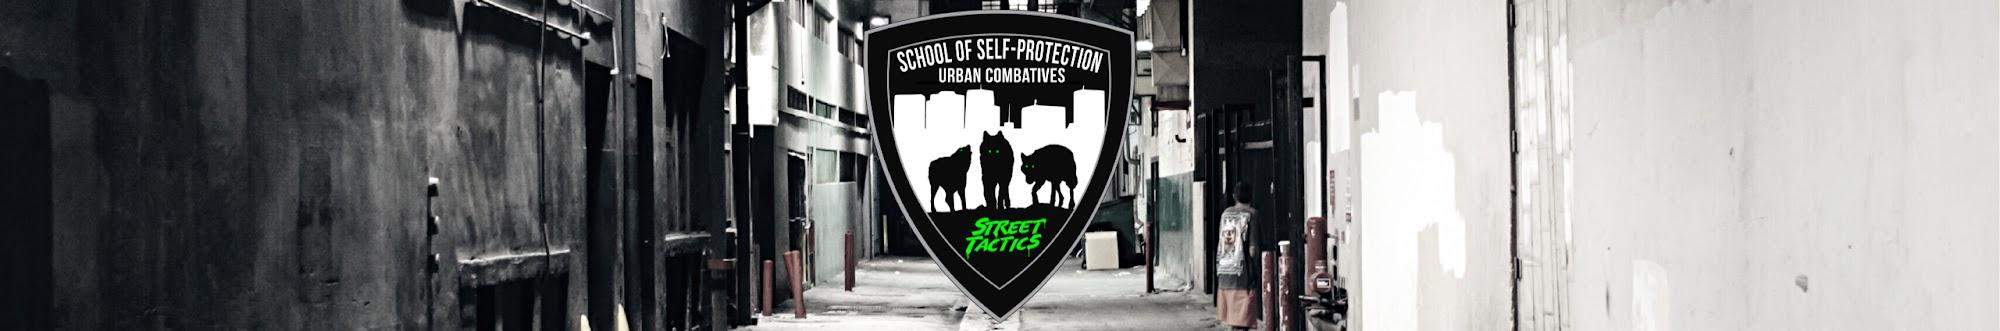 URBAN COMBATIVES         SCHOOL OF SELF-PROTECTION